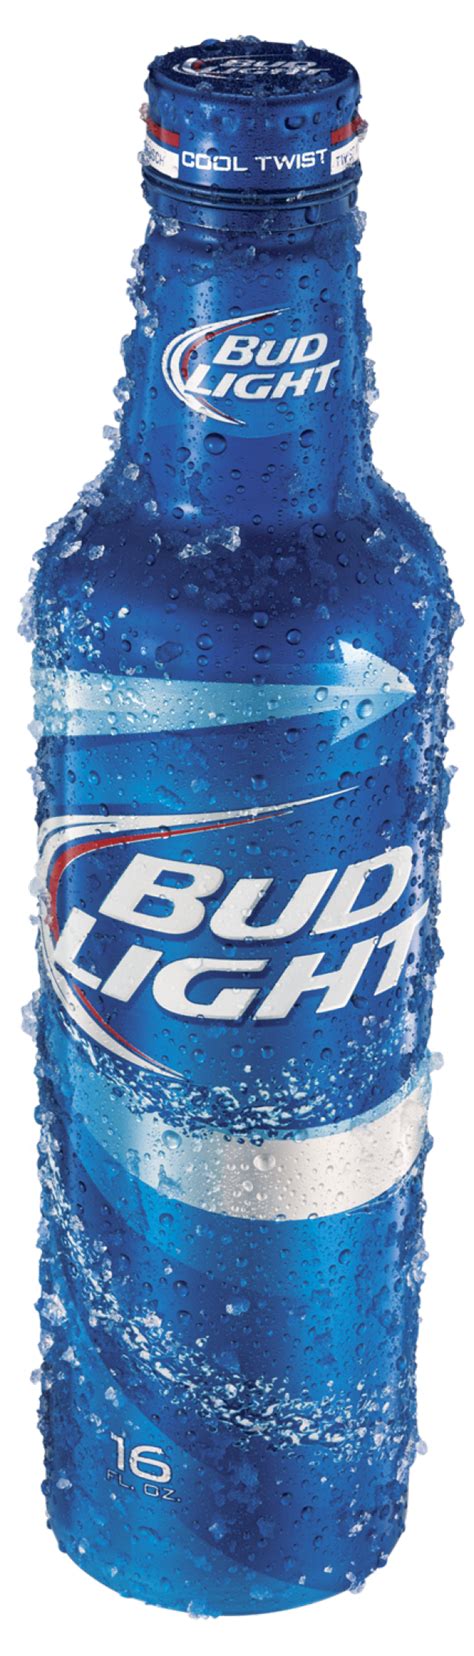 bud light increases ad push   usa promotion business